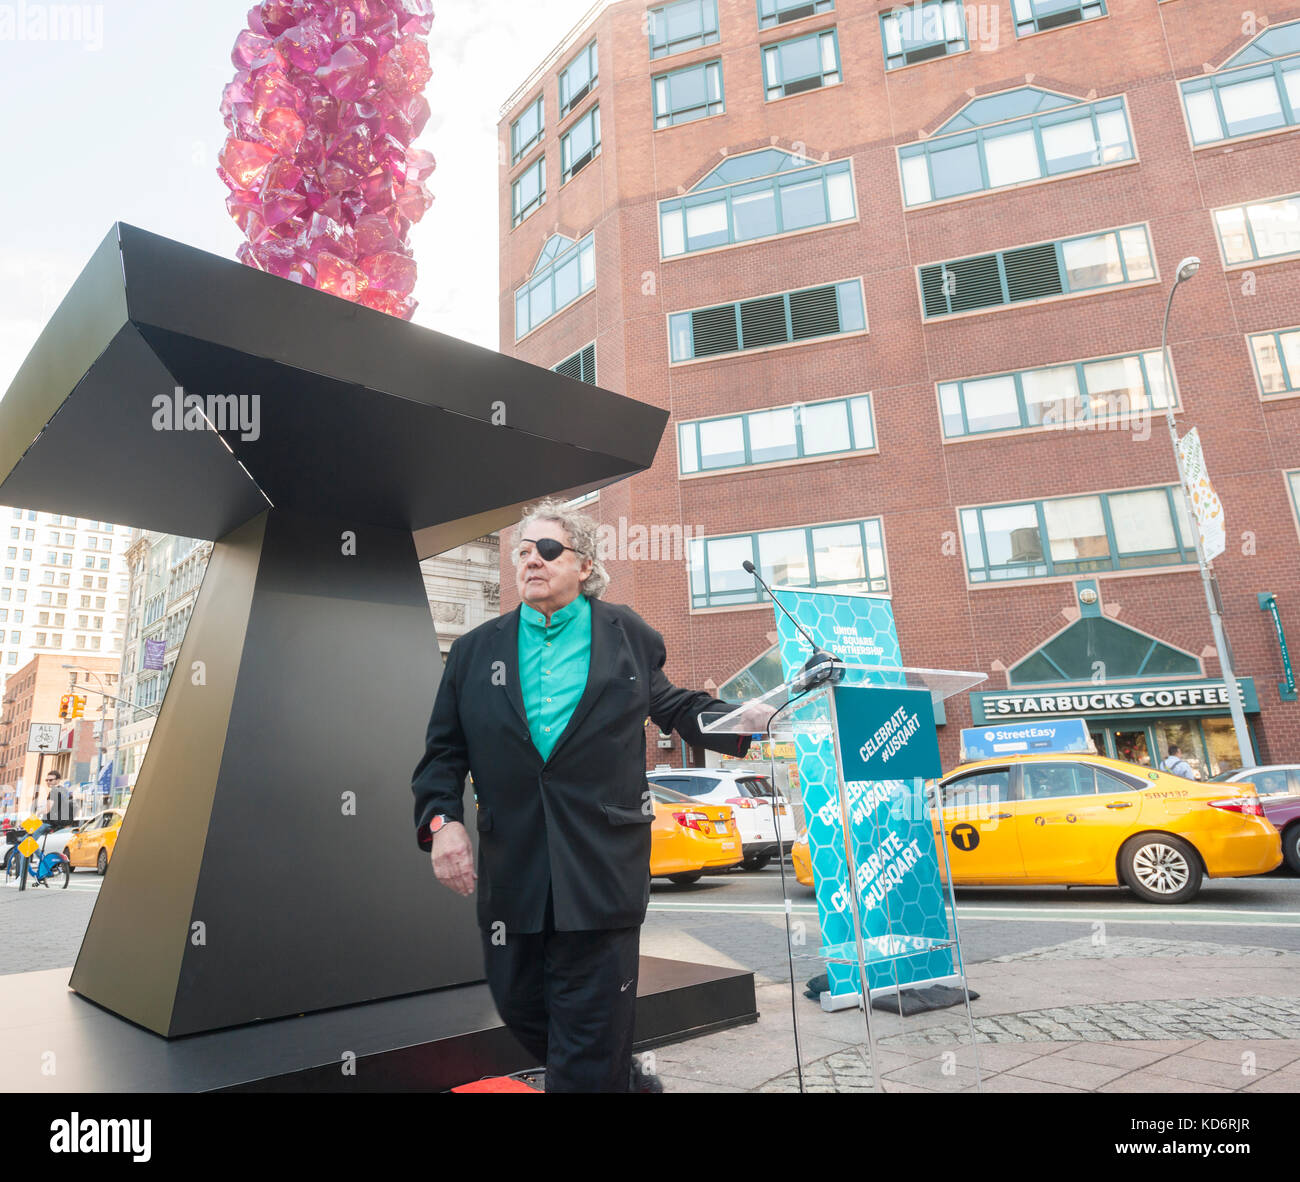 The artist Dale Chihuly at the opening of 'Rose Crystal Tower' on display in Union Square Park in New York on Friday, October 6, 2017. The 31-foot tall sculpture, made of Polyvitro crystal, a form of cast plastic, and steel is part of the 50th anniversary of the Art in the Parks program. Chihuly is known for his work in the Studio Glass movement using the medium of glass to transcend its 'craftiness' into art. 'Rose Crystal Tower' will remain on display until October 2018.(© Richard B. Levine) Stock Photo